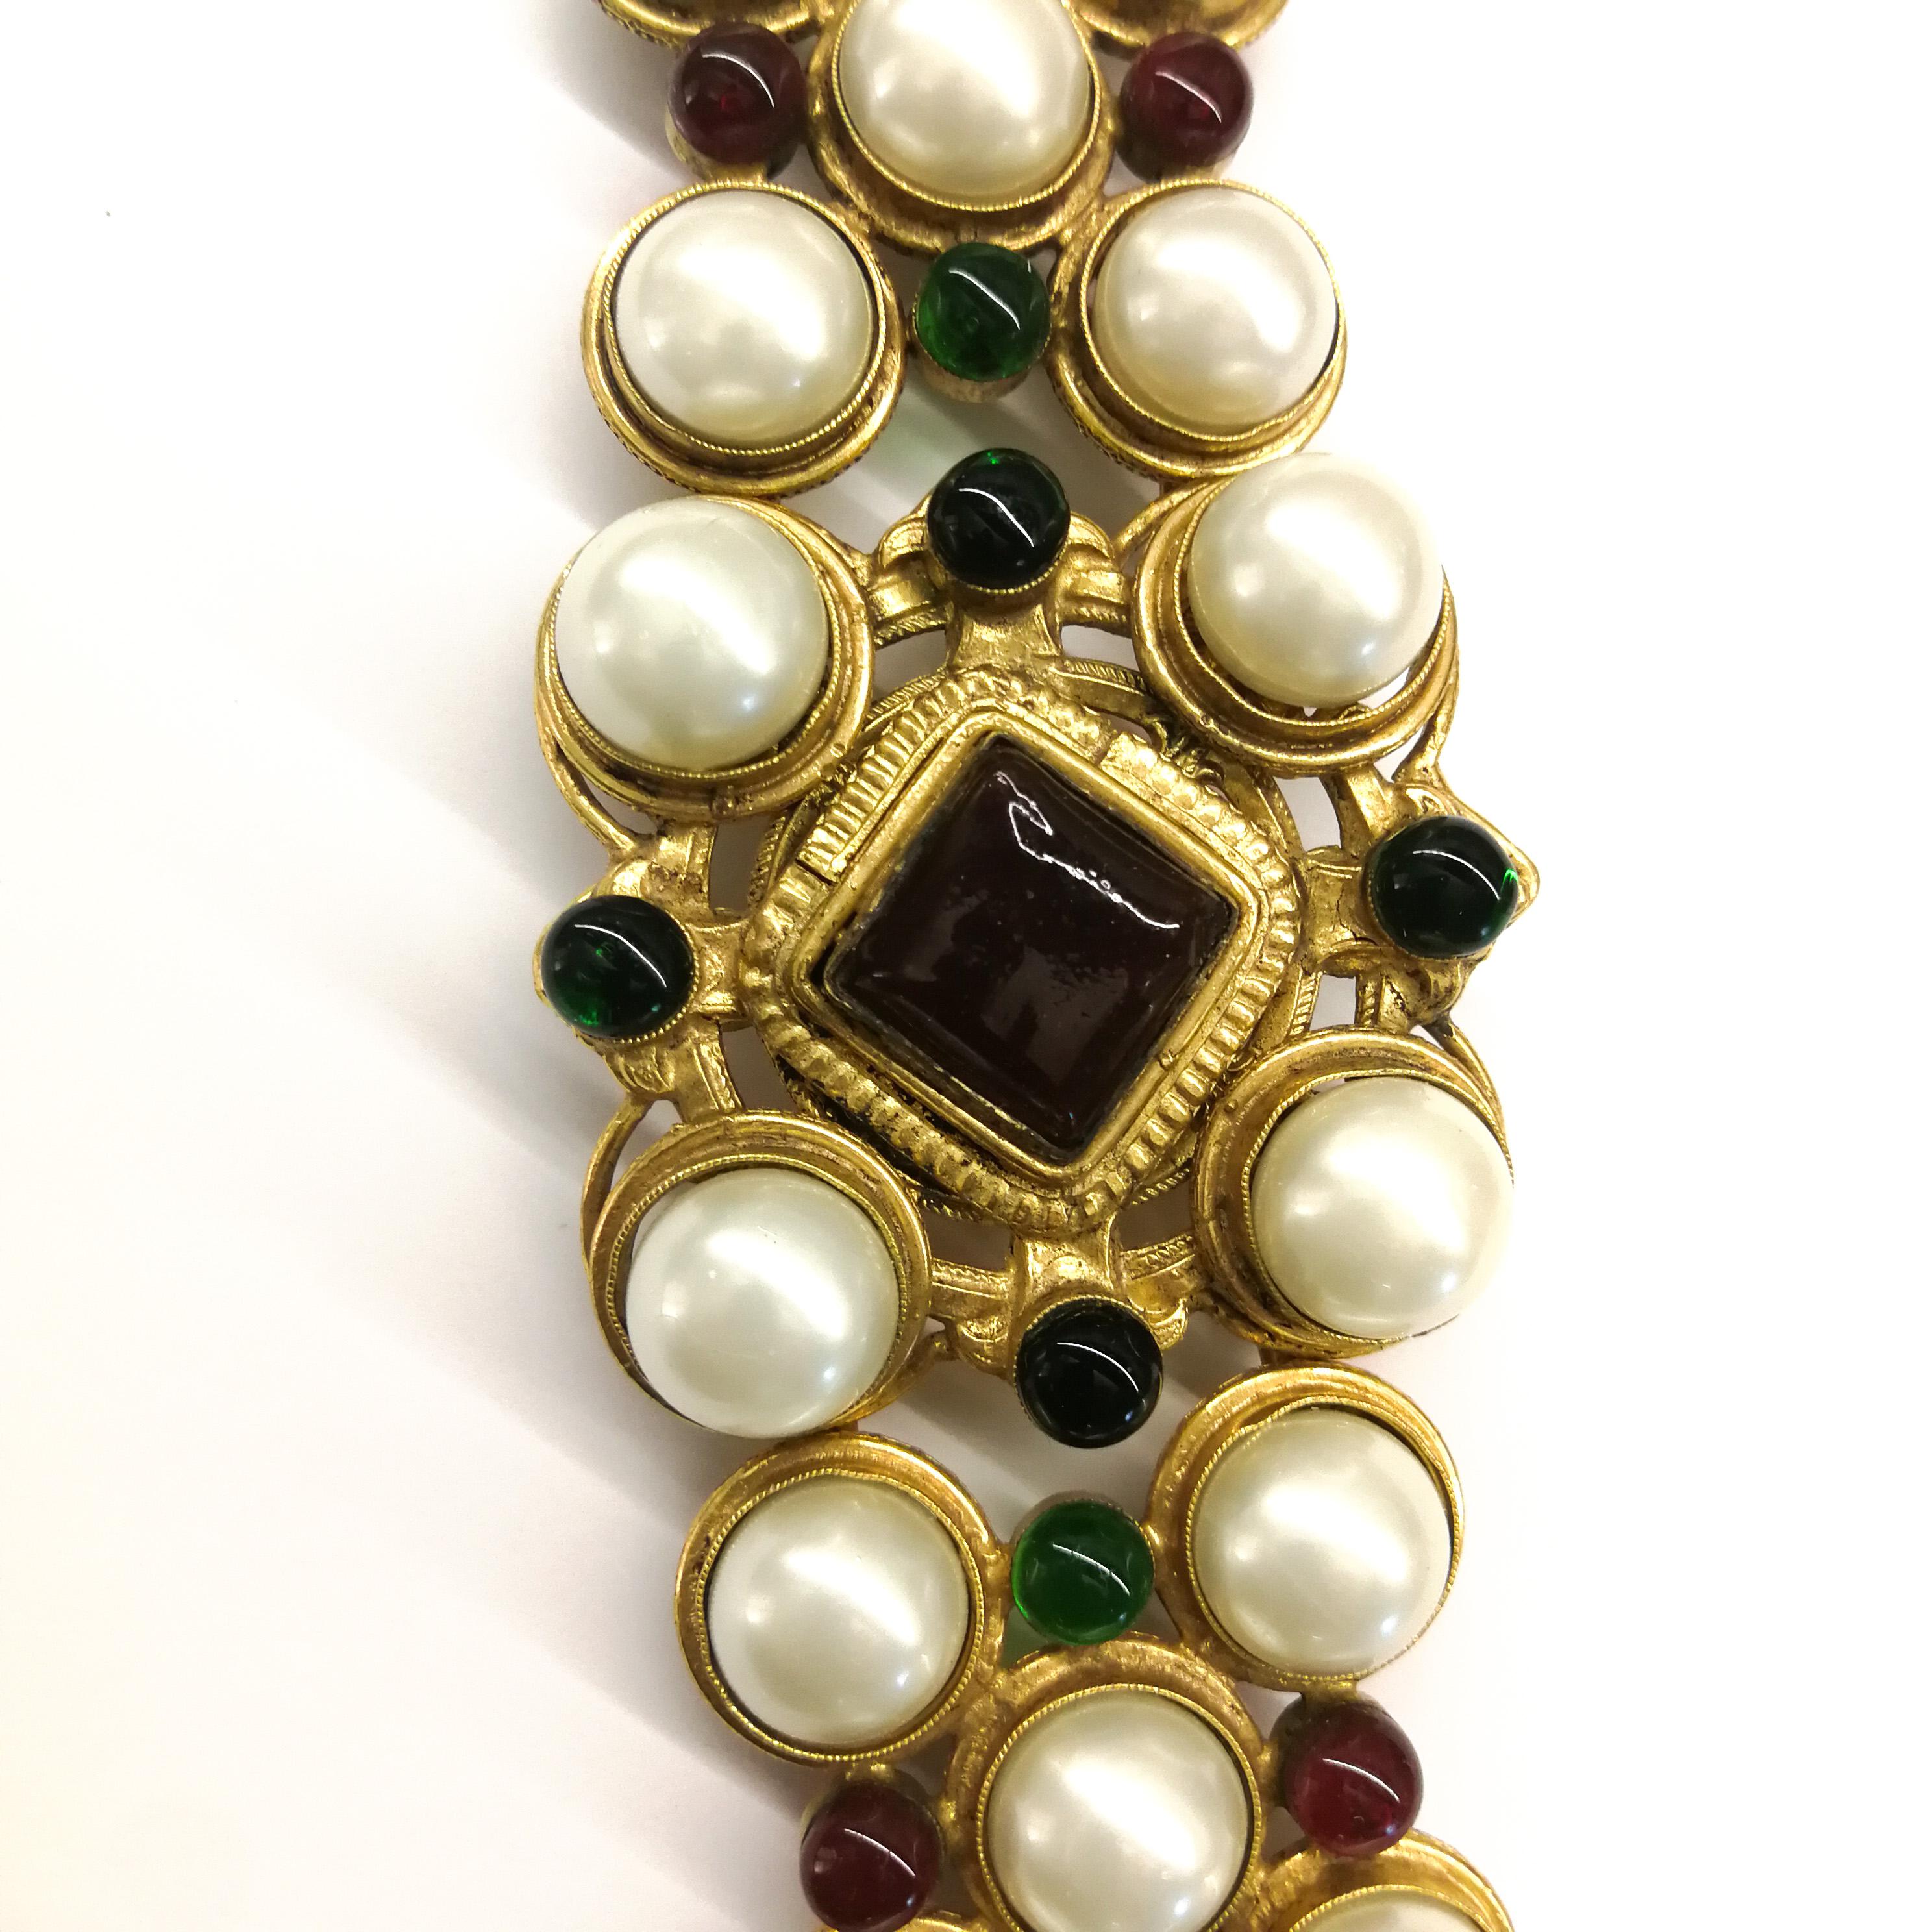 Baroque Vintage Chanel dynamic poured glass, paste pearl and gilt bracelet, 1970s/1980s